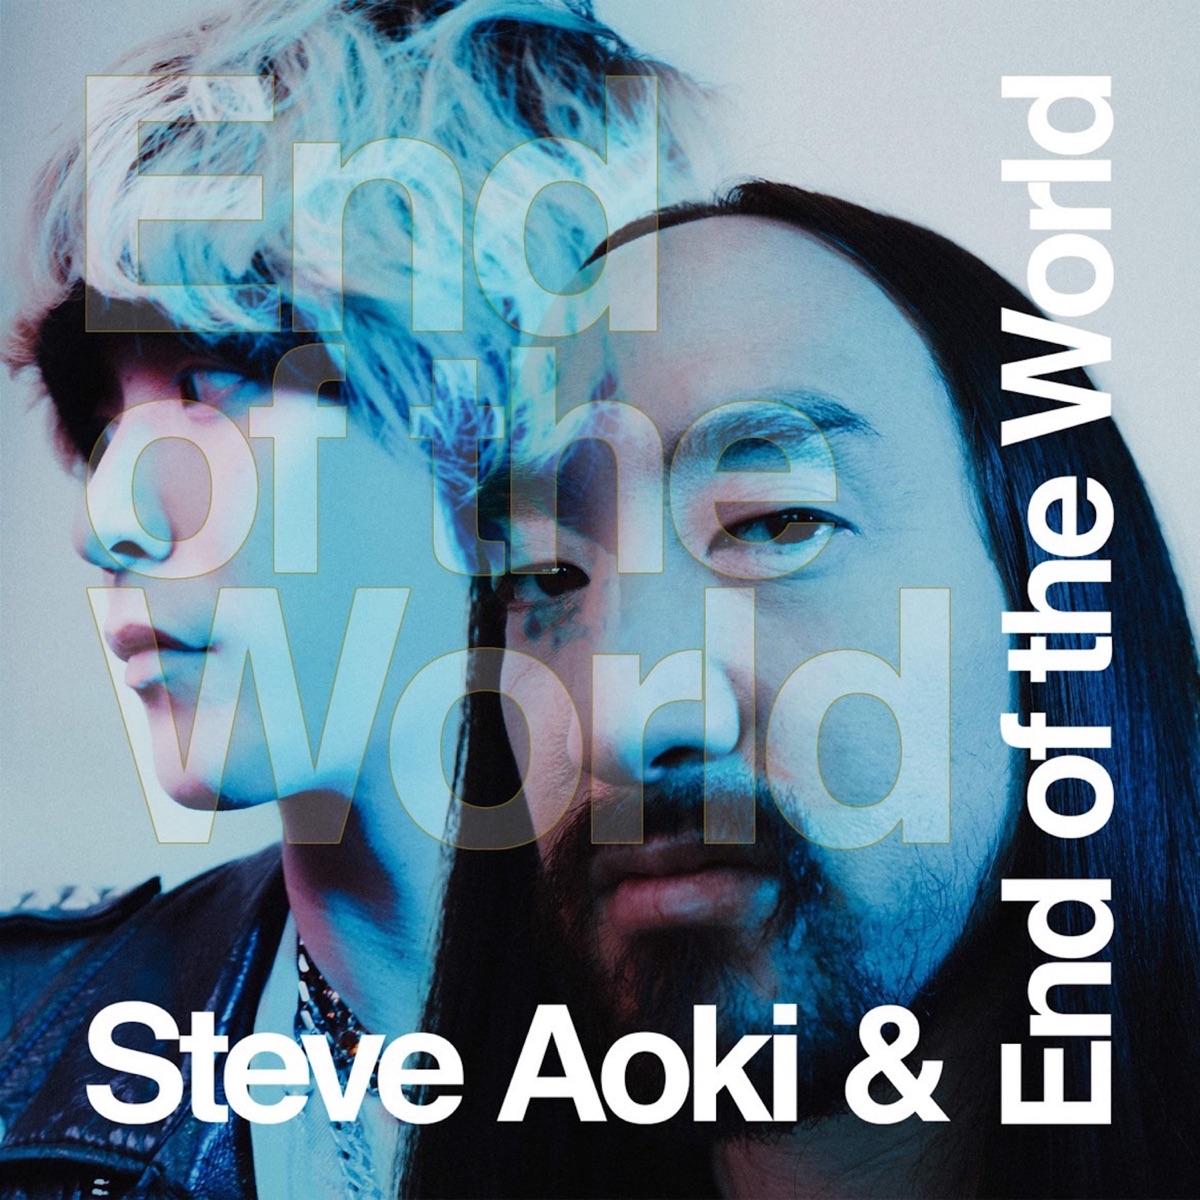 『End of the World & Steve Aoki - END OF THE WORLD 歌詞』収録の『END OF THE WORLD』ジャケット